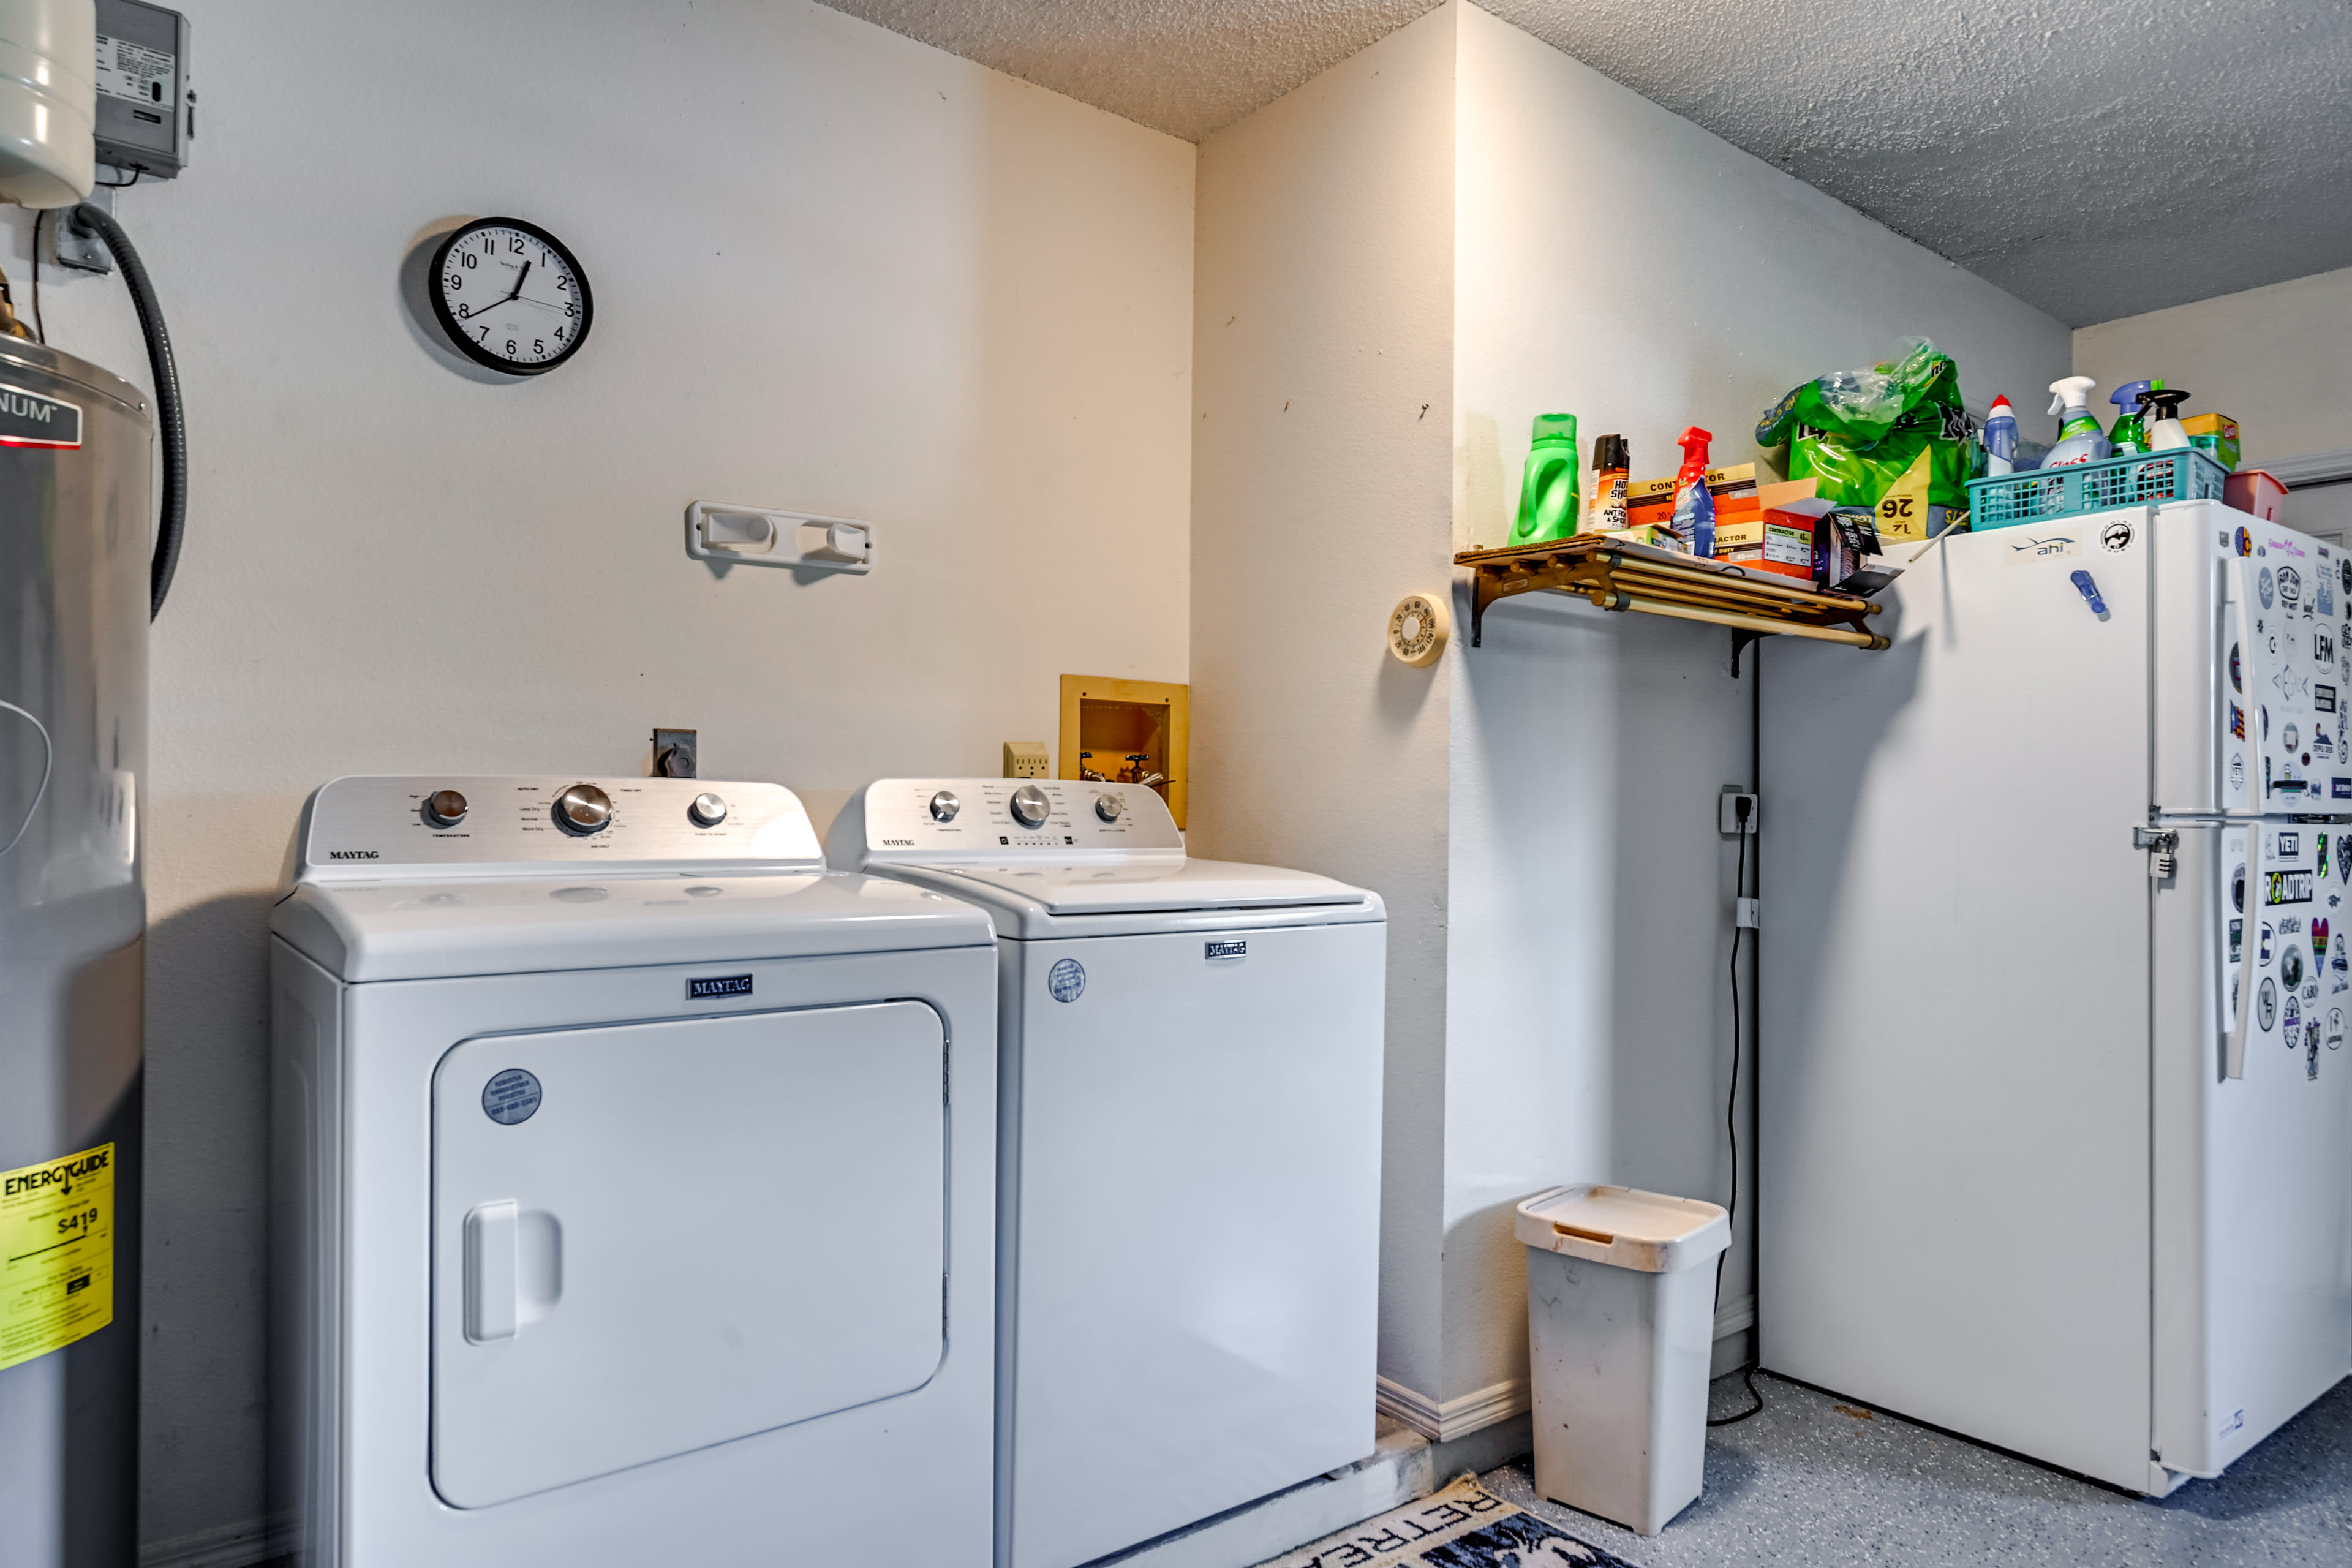 Laundry Area | Detergent Provided